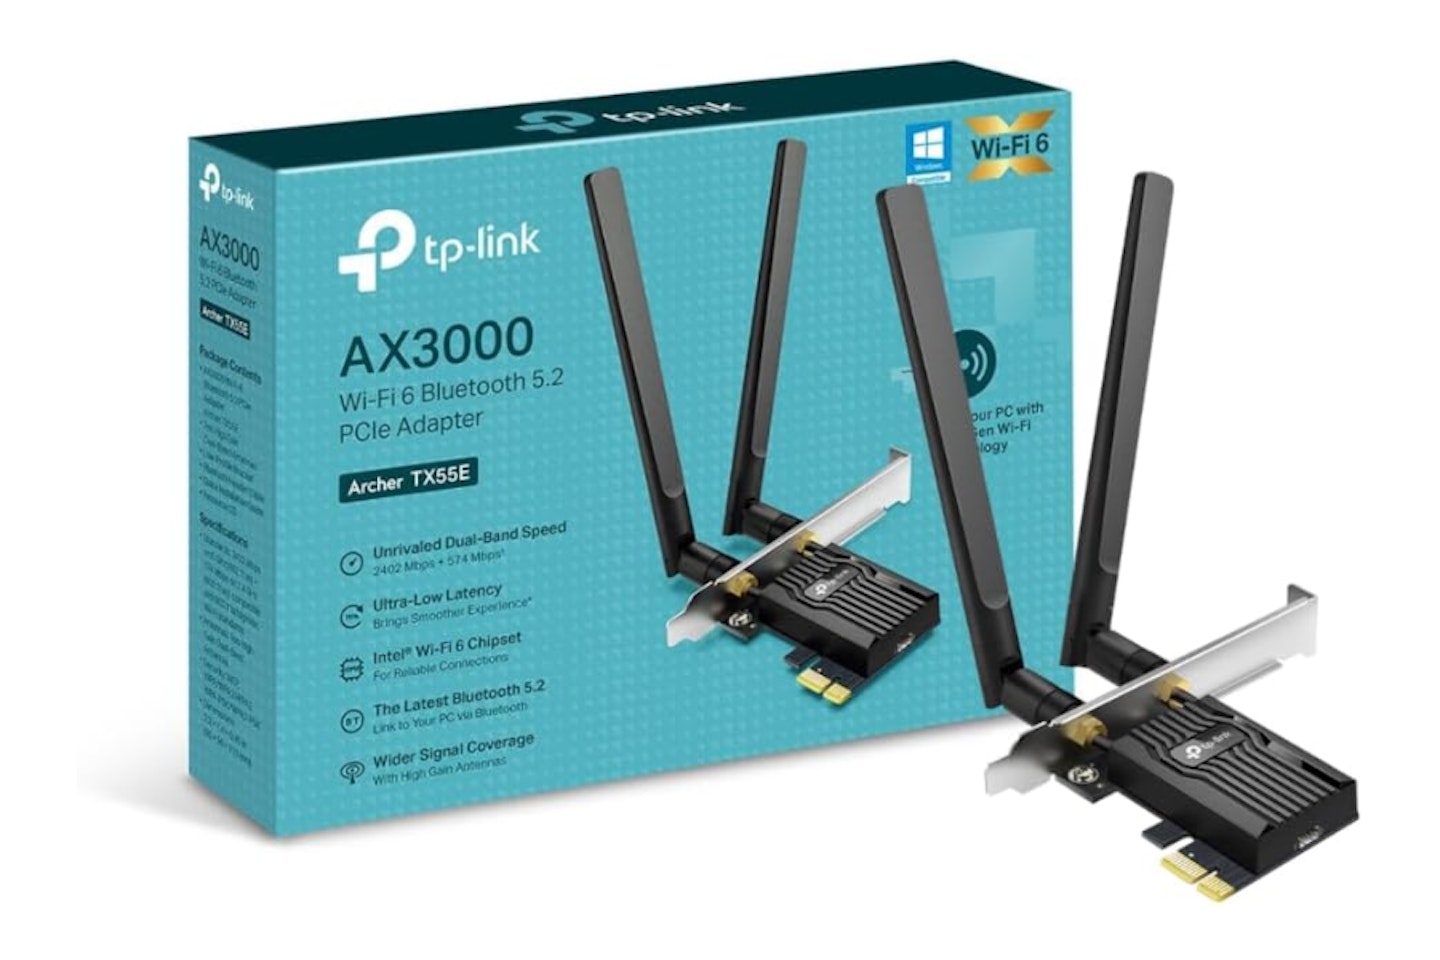 TP-Link AX3000 Dual-Band Wi-Fi 6 Bluetooth 5.2 PCIe Adapter - possibly the best wifi card for gaming